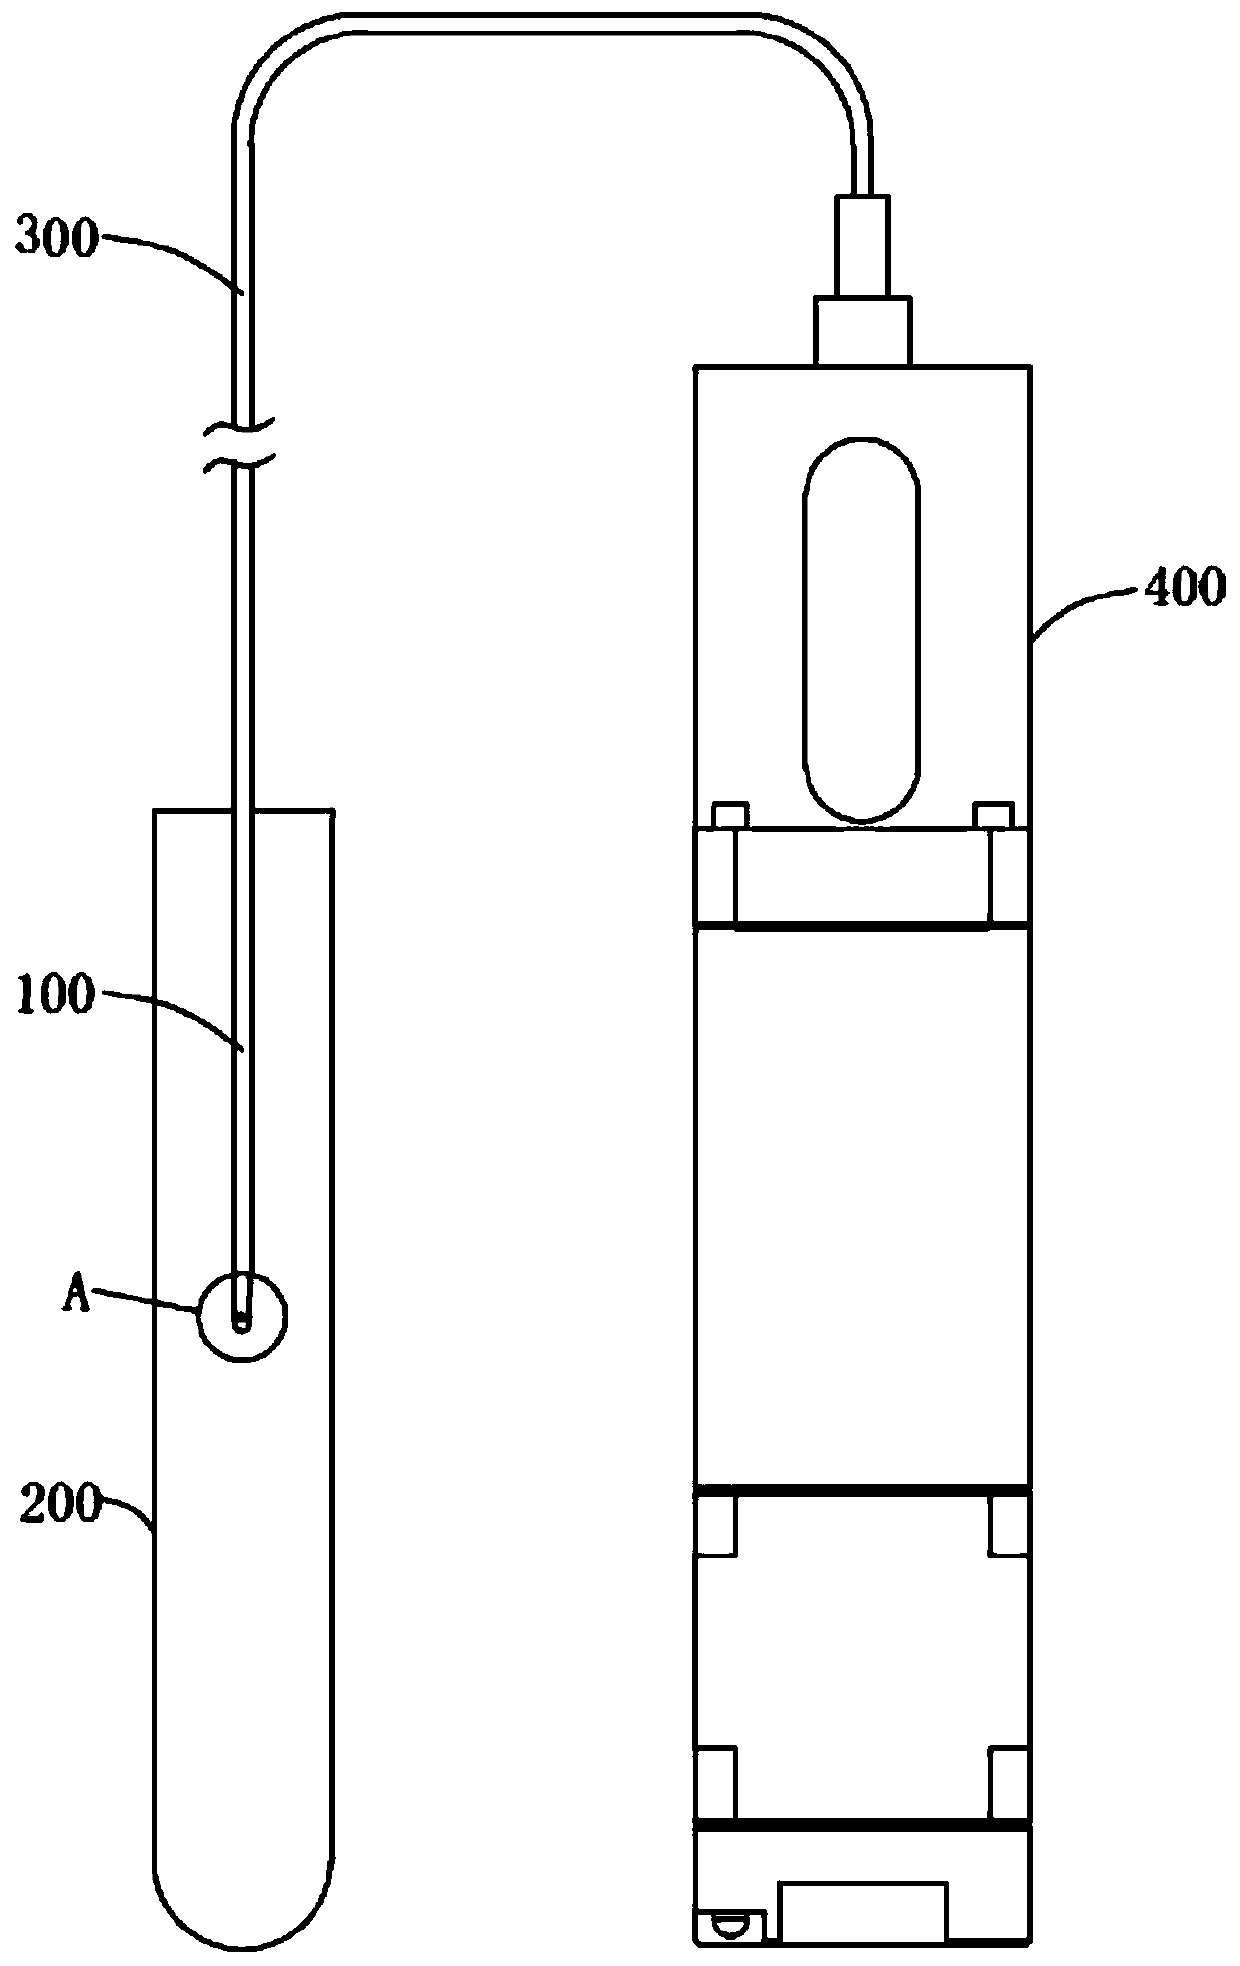 Sample tube cleaning device and solid-phase extraction equipment